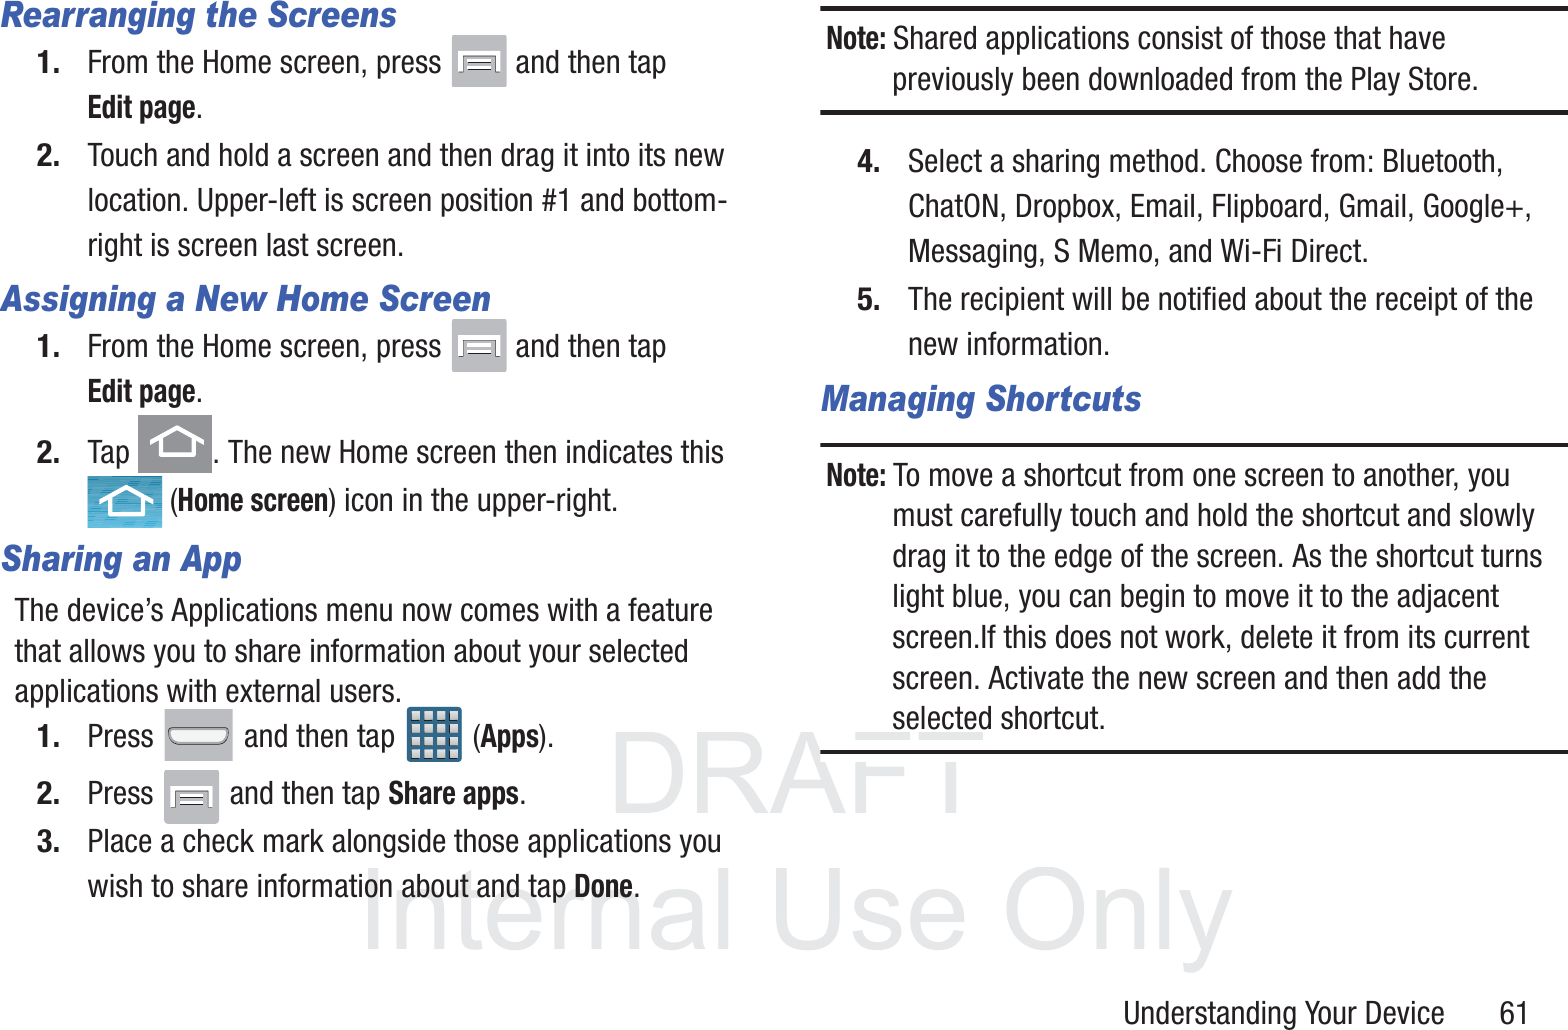 DRAFT InternalUse OnlyUnderstanding Your Device       61Rearranging the Screens1. From the Home screen, press   and then tap Edit page.  2. Touch and hold a screen and then drag it into its new location. Upper-left is screen position #1 and bottom-right is screen last screen.Assigning a New Home Screen1. From the Home screen, press   and then tap Edit page.  2. Tap  . The new Home screen then indicates this  (Home screen) icon in the upper-right.Sharing an AppThe device’s Applications menu now comes with a feature that allows you to share information about your selected applications with external users.1. Press   and then tap  (Apps).2. Press   and then tap Share apps.3. Place a check mark alongside those applications you wish to share information about and tap Done.Note: Shared applications consist of those that have previously been downloaded from the Play Store.4. Select a sharing method. Choose from: Bluetooth, ChatON, Dropbox, Email, Flipboard, Gmail, Google+, Messaging, S Memo, and Wi-Fi Direct.5. The recipient will be notified about the receipt of the new information.Managing ShortcutsNote: To move a shortcut from one screen to another, you must carefully touch and hold the shortcut and slowly drag it to the edge of the screen. As the shortcut turns light blue, you can begin to move it to the adjacent screen.If this does not work, delete it from its current screen. Activate the new screen and then add the selected shortcut.